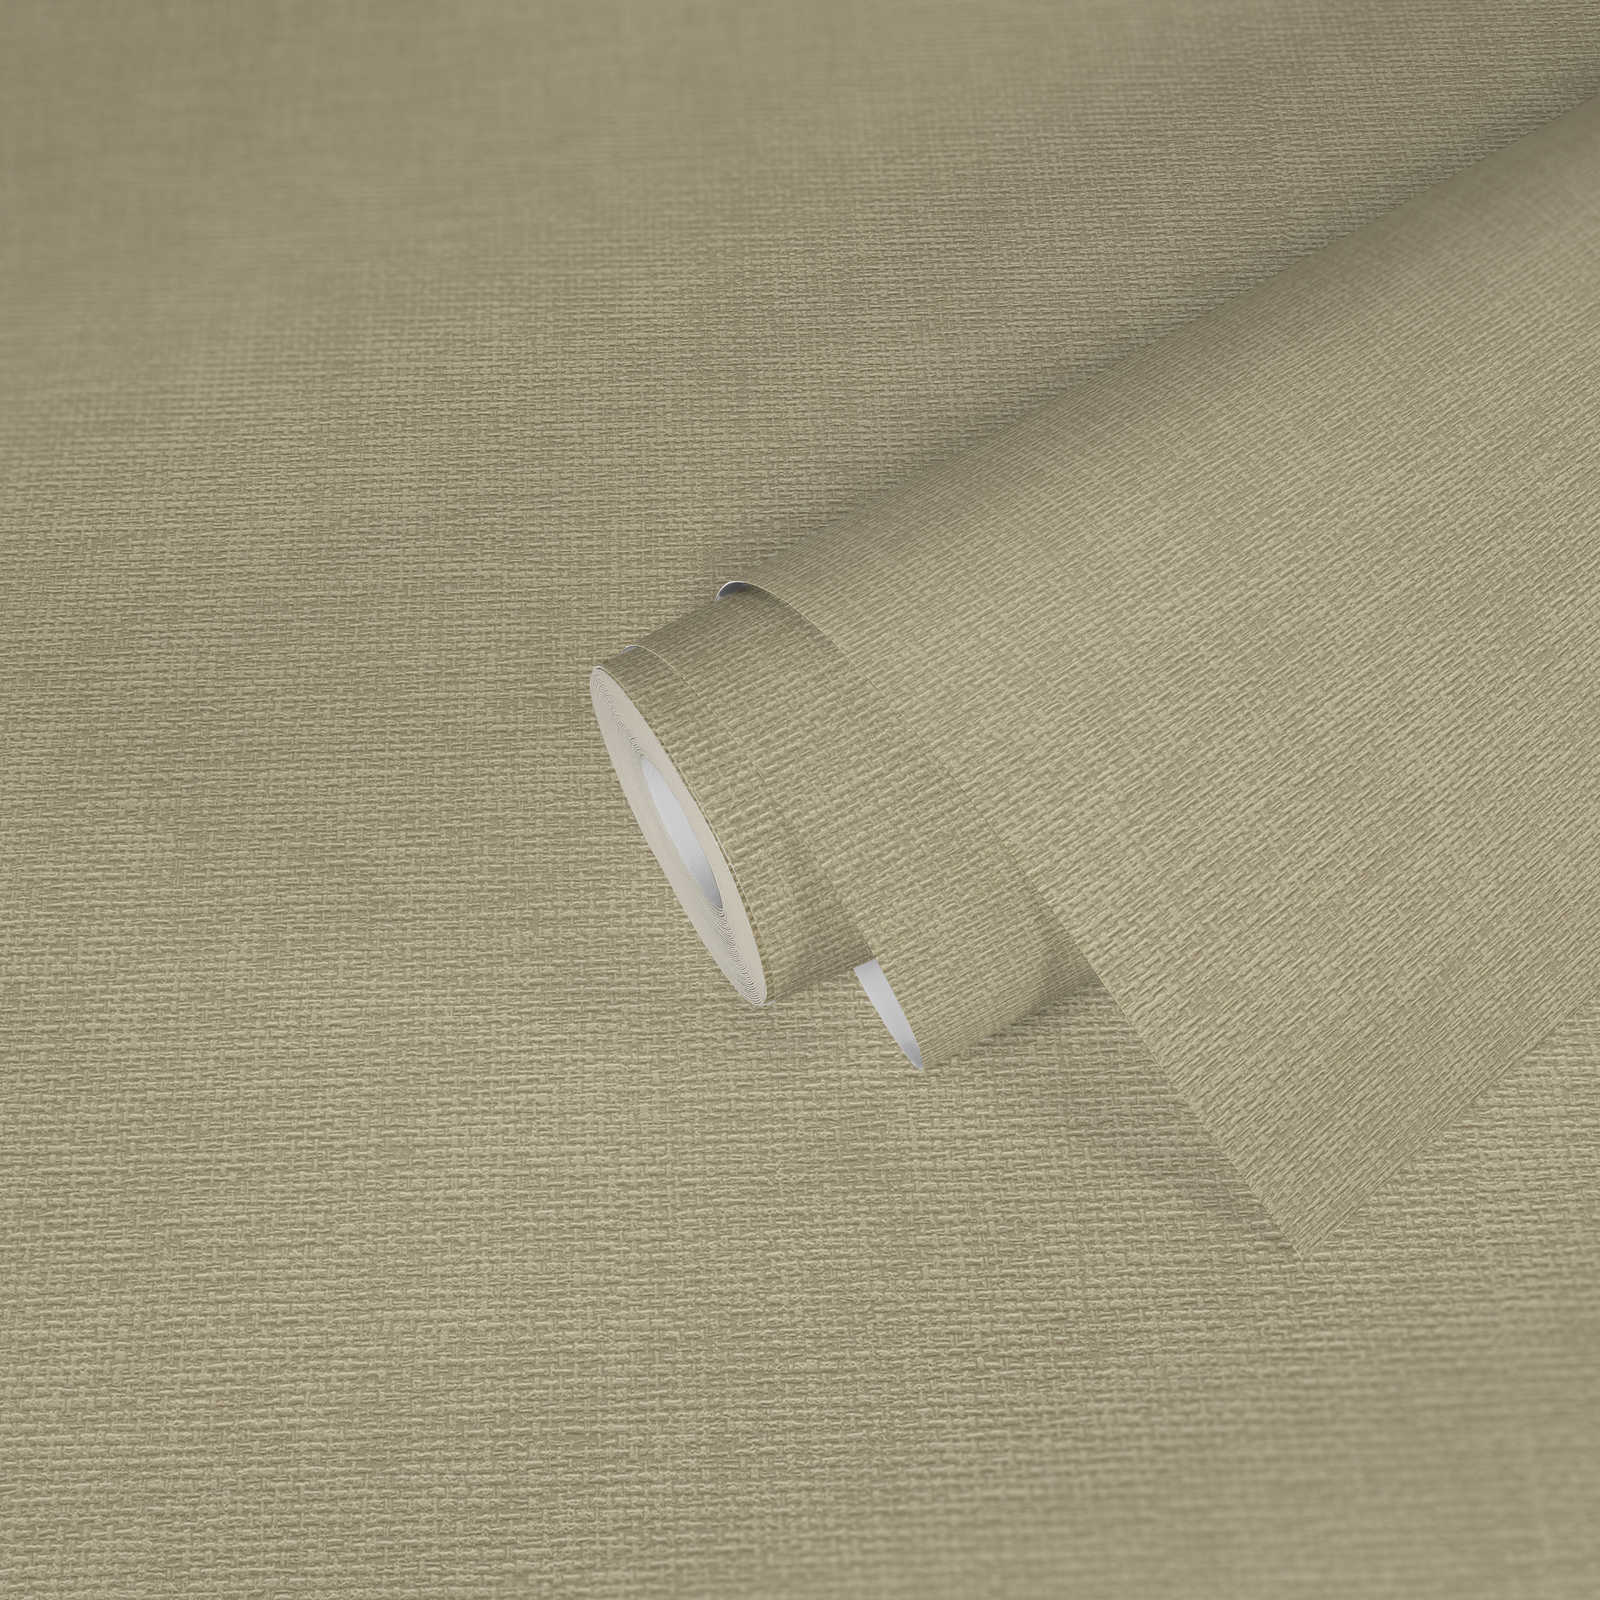             Textile design wallpaper with fabric structure - beige, grey
        